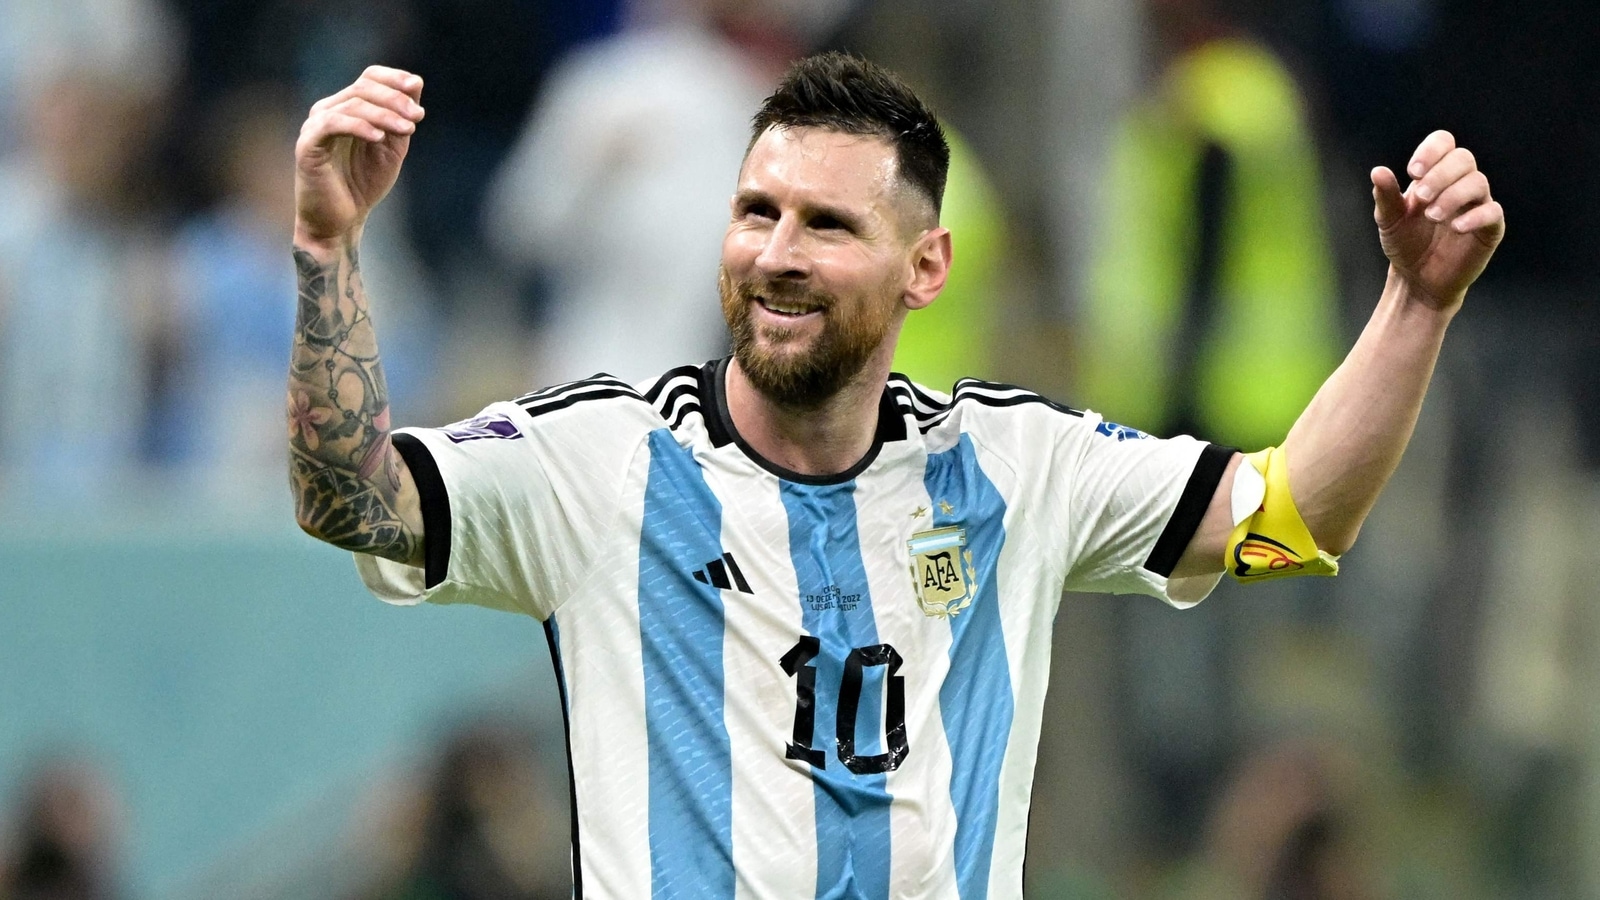 What records and awards does Argentina's Lionel Messi hold